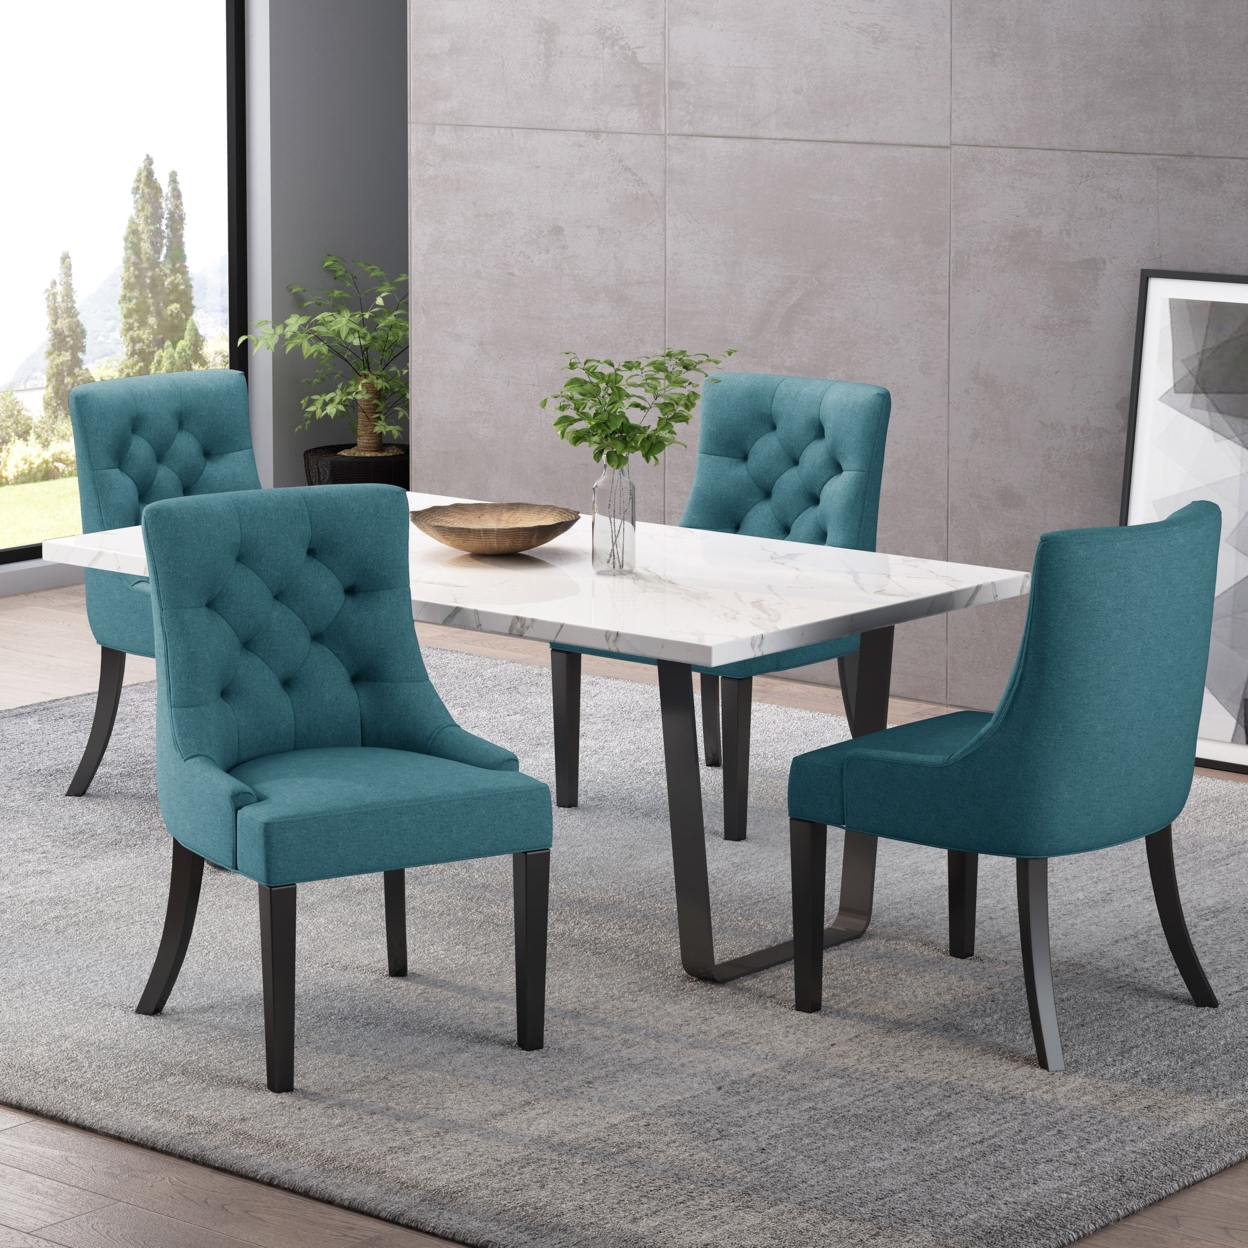 Stacy Hourglass Fabric Dining Chairs (Set Of 4) - Dark Teal